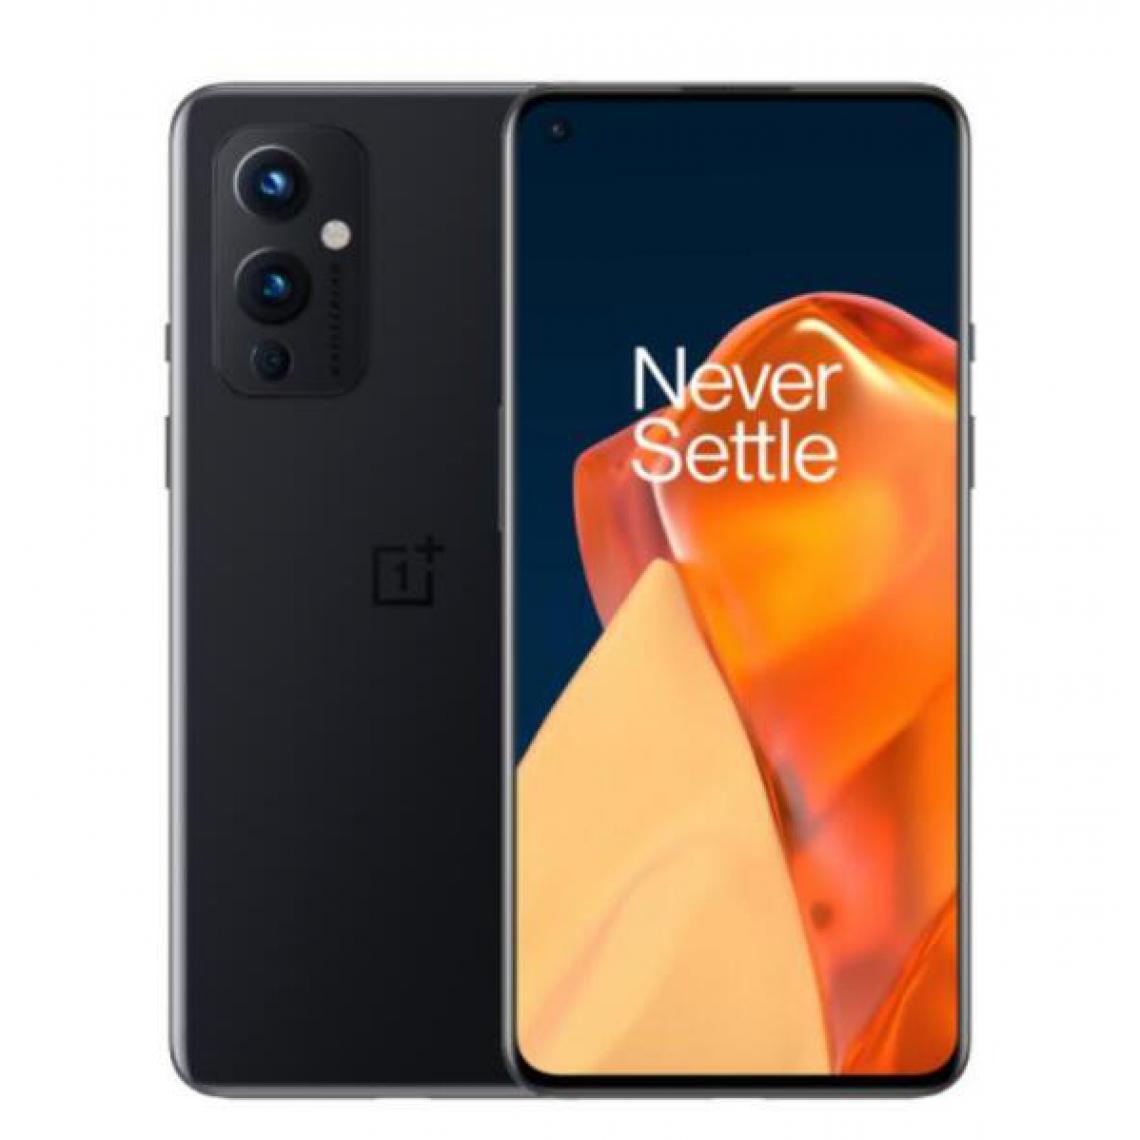 Oneplus - OnePlus 9 5G Global Rom Snapdragon 888 Smartphone 8Go 128Go - Smartphone Android